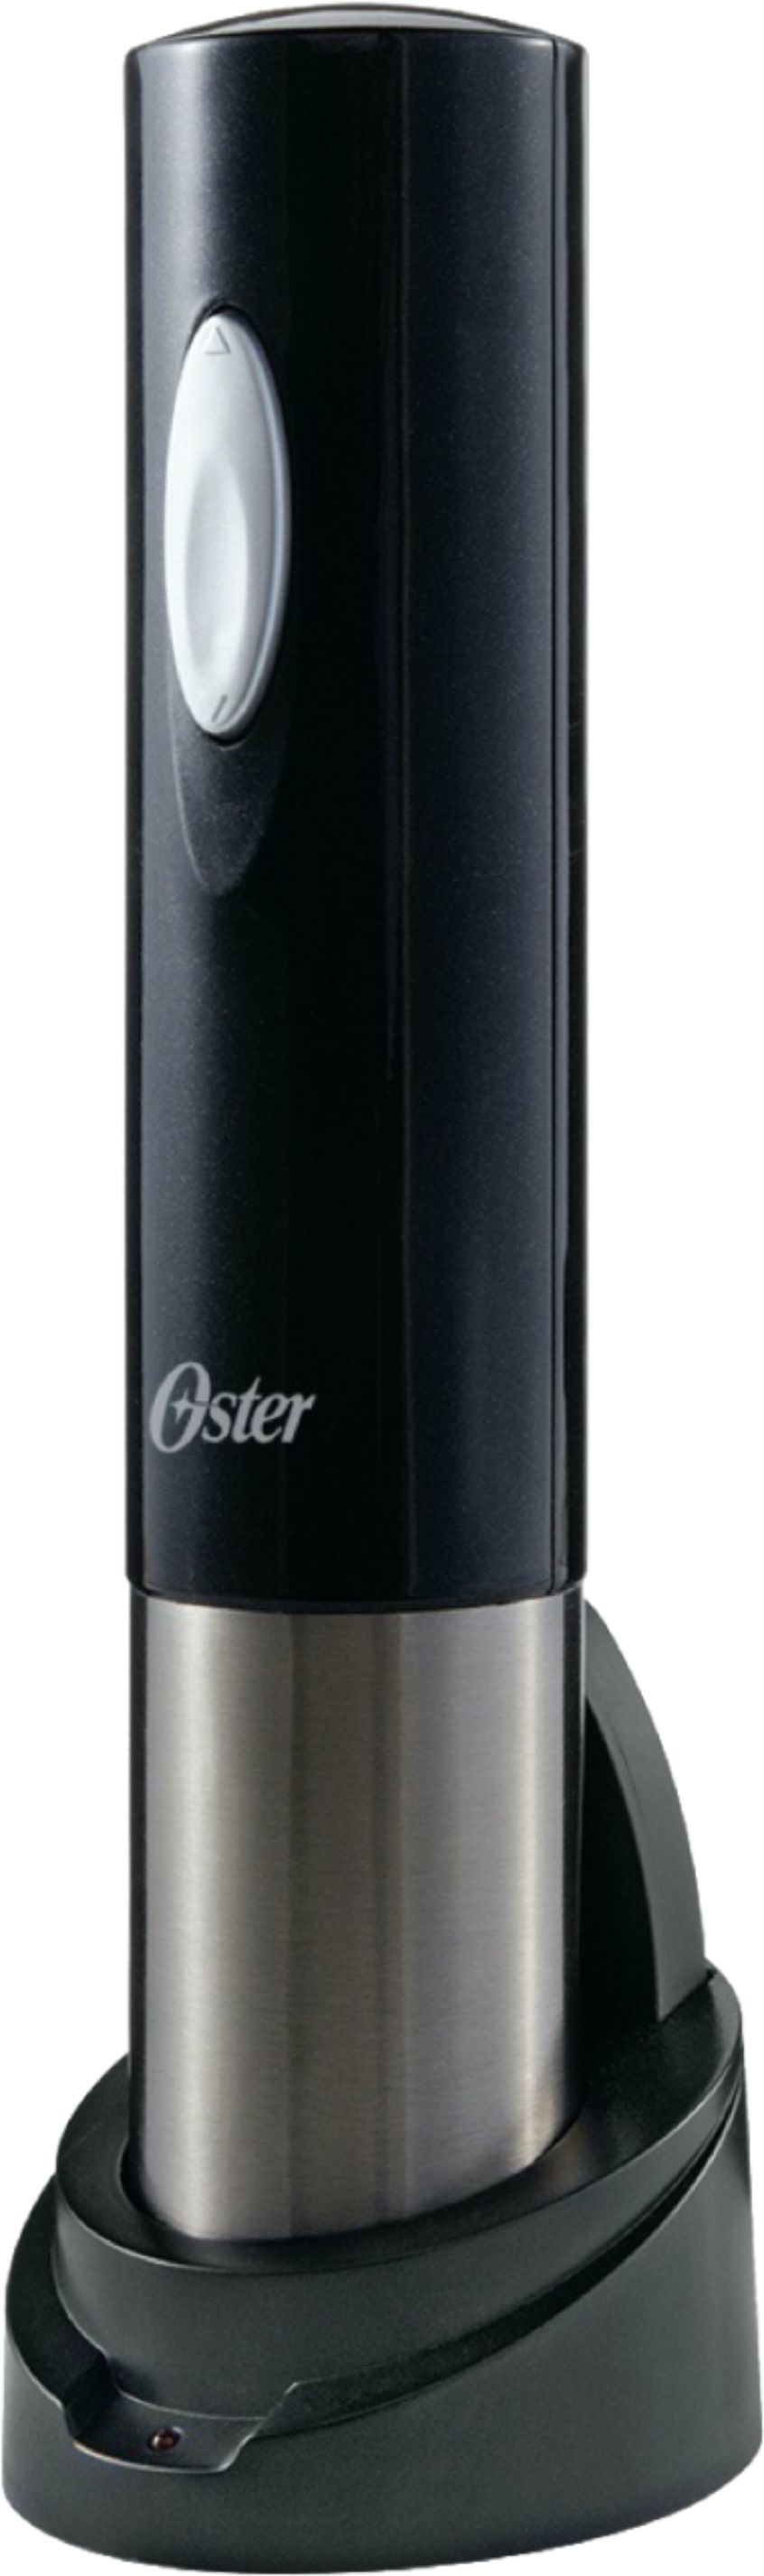 Oster Electric Can Opener With Power Pierce Cutting Blade For Preise Edges  Black